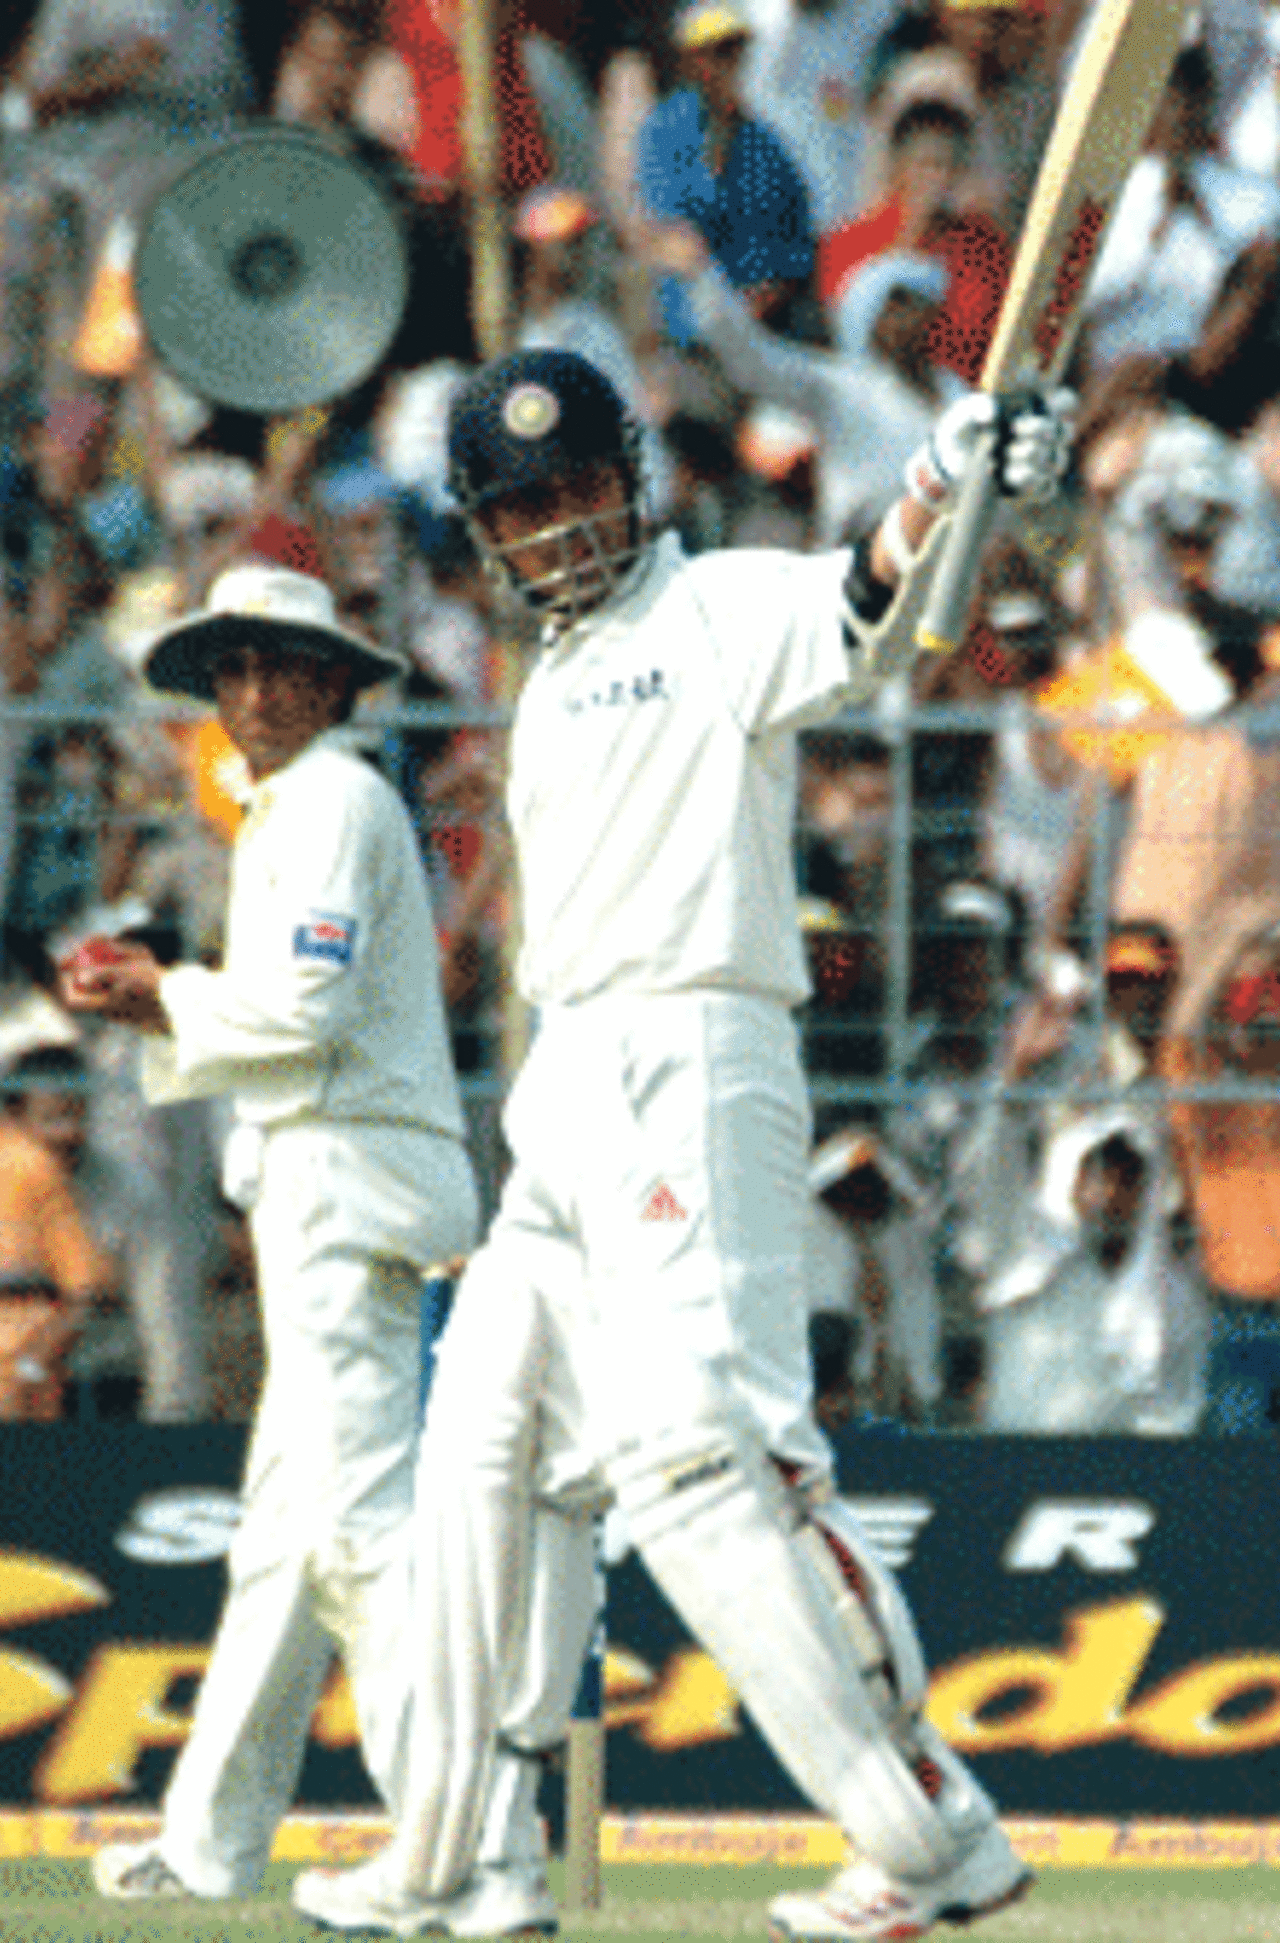 Tendulkar joins the 10000-run club - After missing out at Mohali, when he was dismissed 27 runs short of the 10000-run milestone, Tendulkar made sure he gave his fans an opportunity to celebrate. When he nudged a Abdul Razzaq delivery off his pads to long leg and pinched a single, he became the second Indian and the fifth man in test history to score 10000-test runs or more, 2nd Test: India v Pakistan at Kolkata, 16-20 Mar 2005